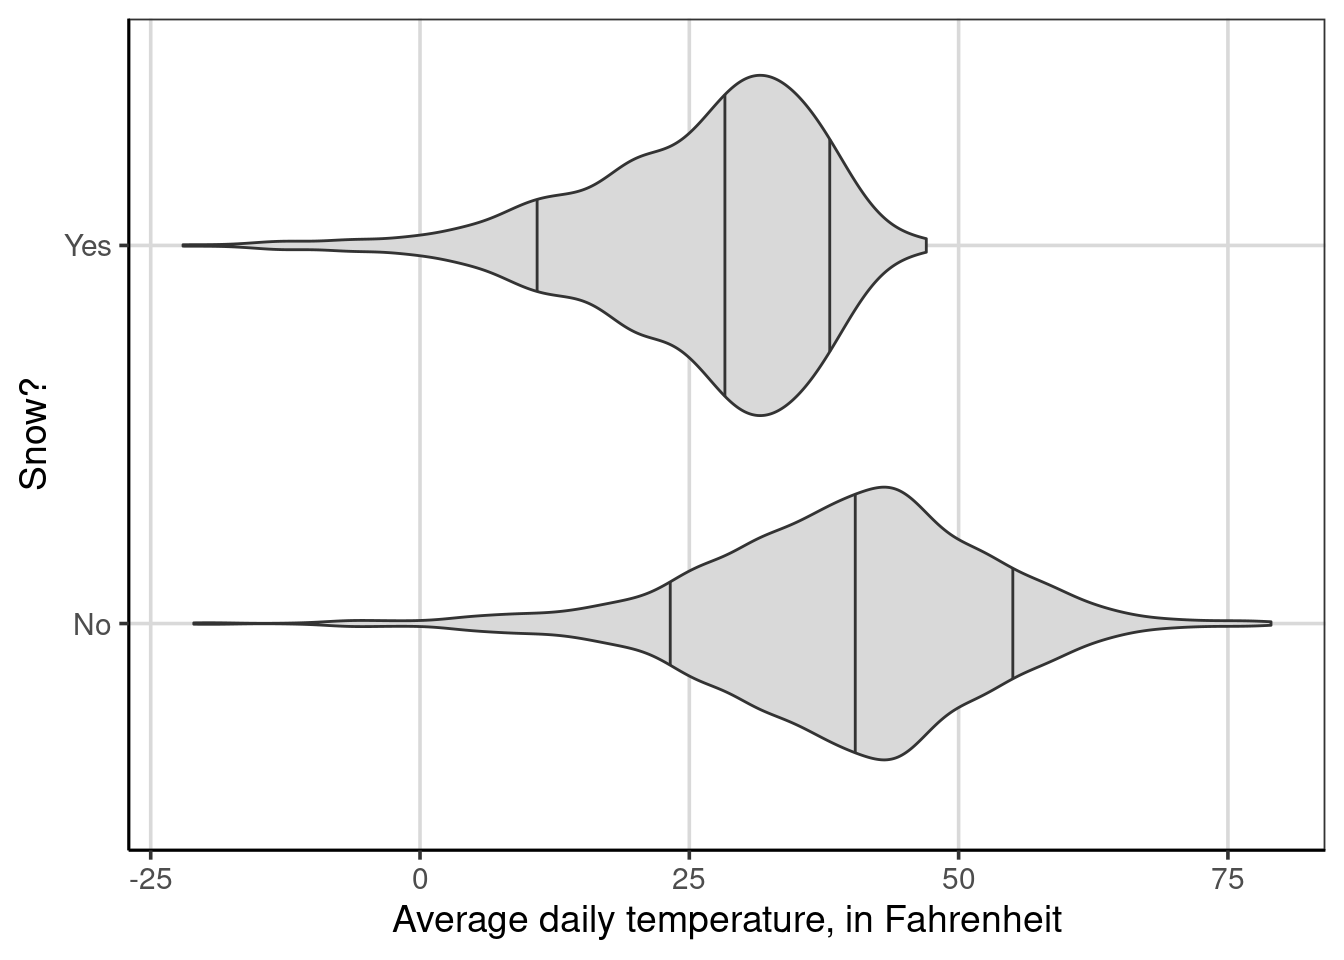 Multivariate distribution of average daily temperature by whether it snowed